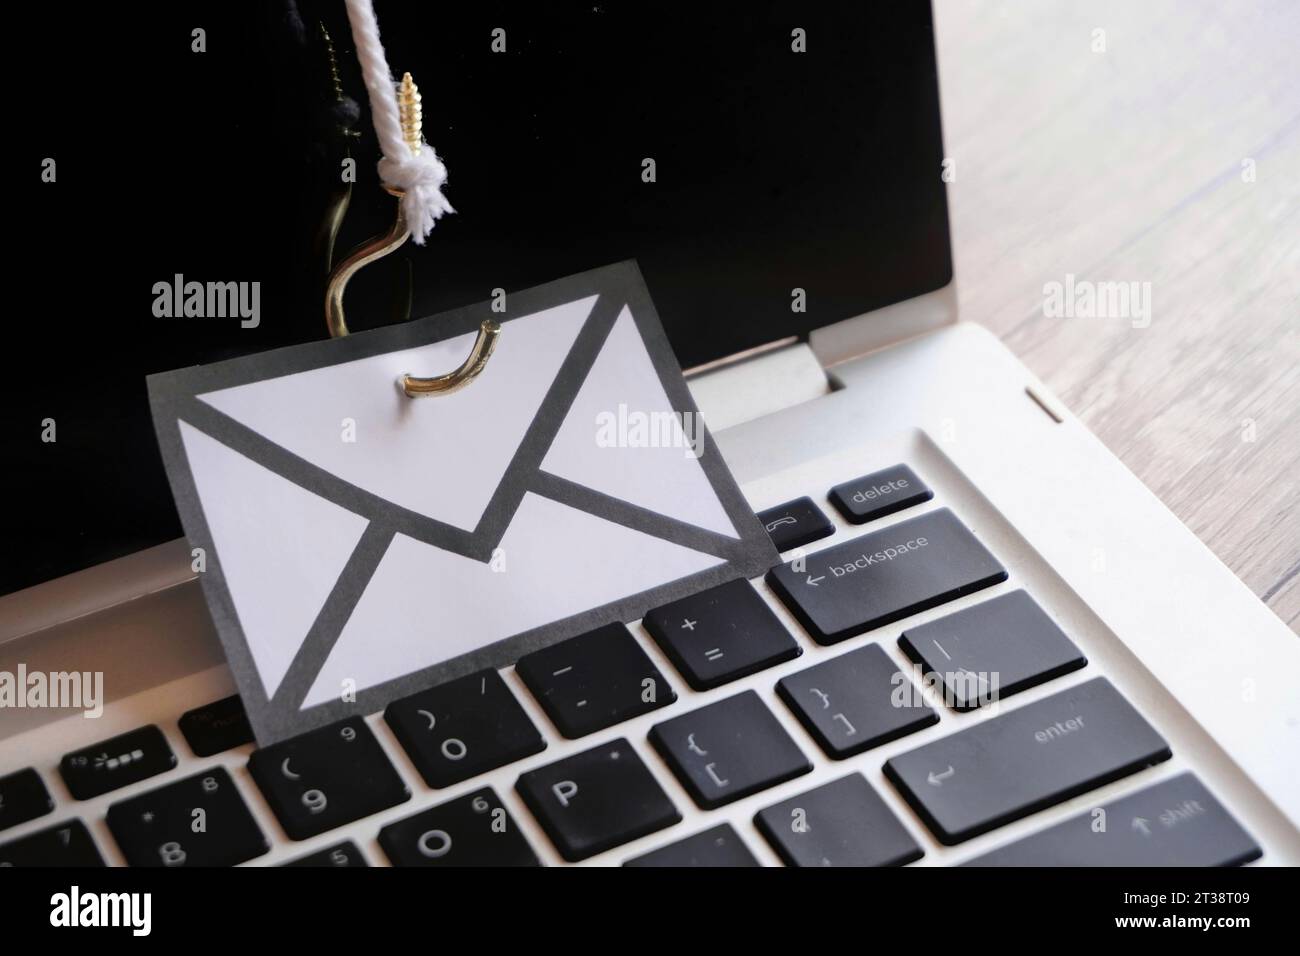 Closeup image of mail with hook on top of keyboard. Phishing email, malware and cyber security concept Stock Photo